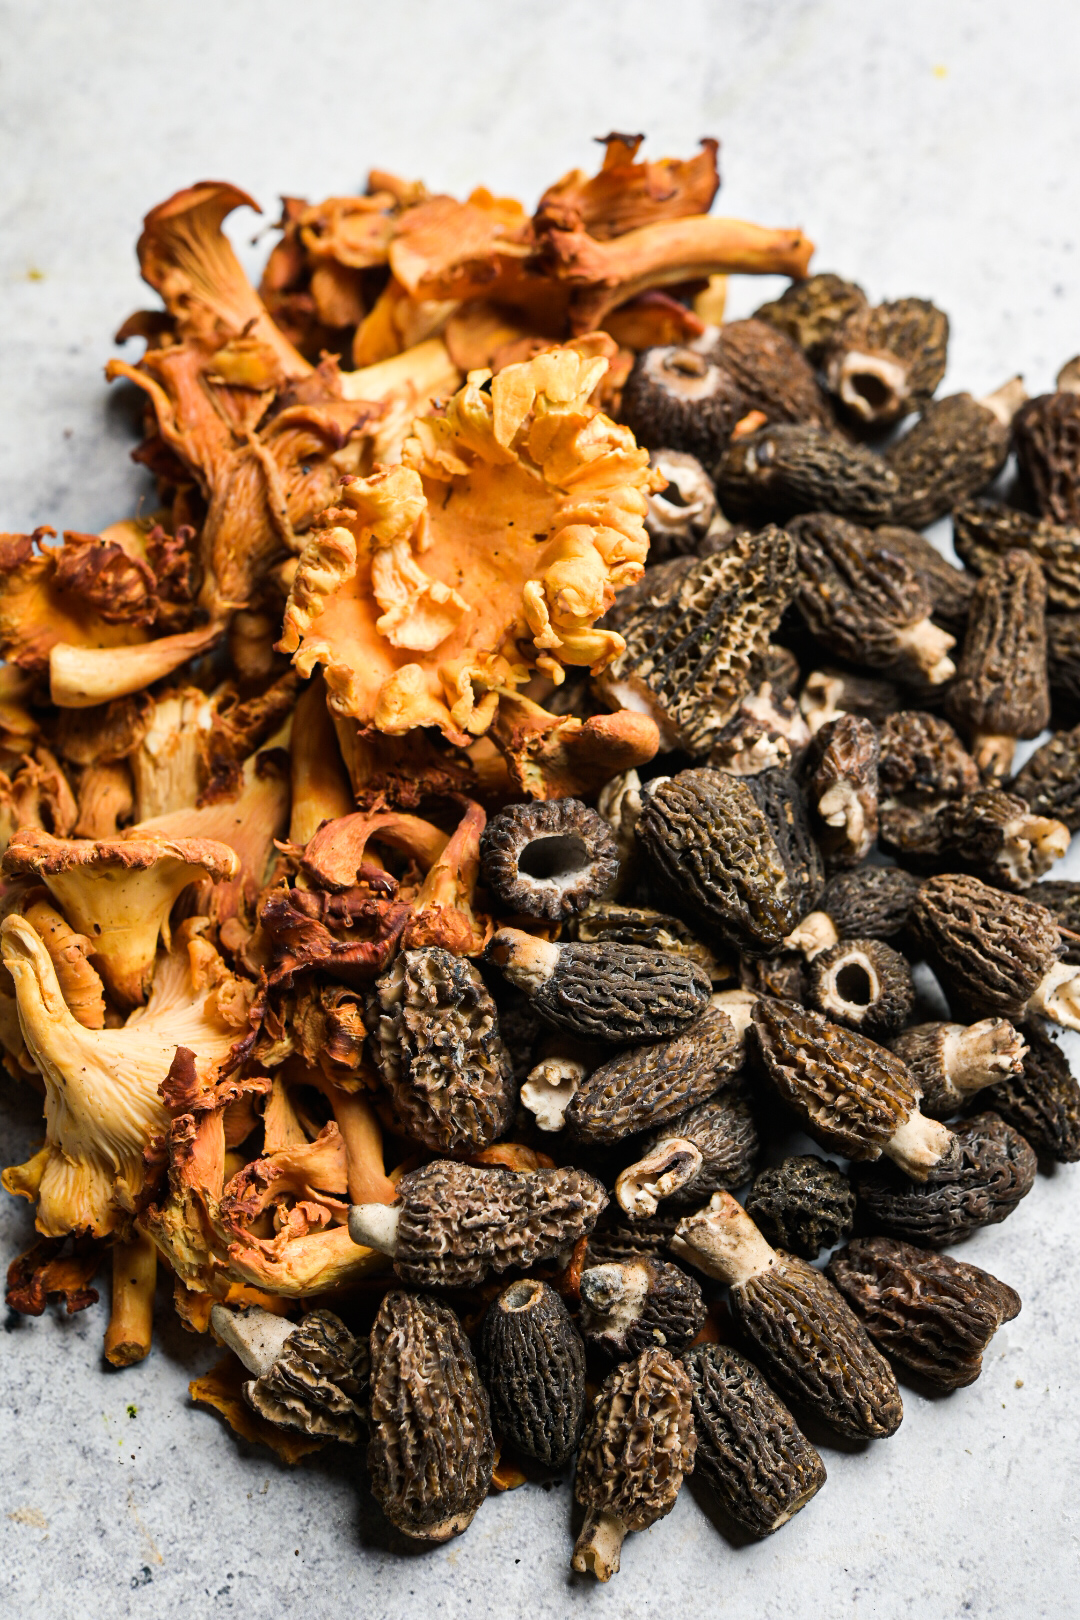 Foraged chanterelle and morel mushrooms